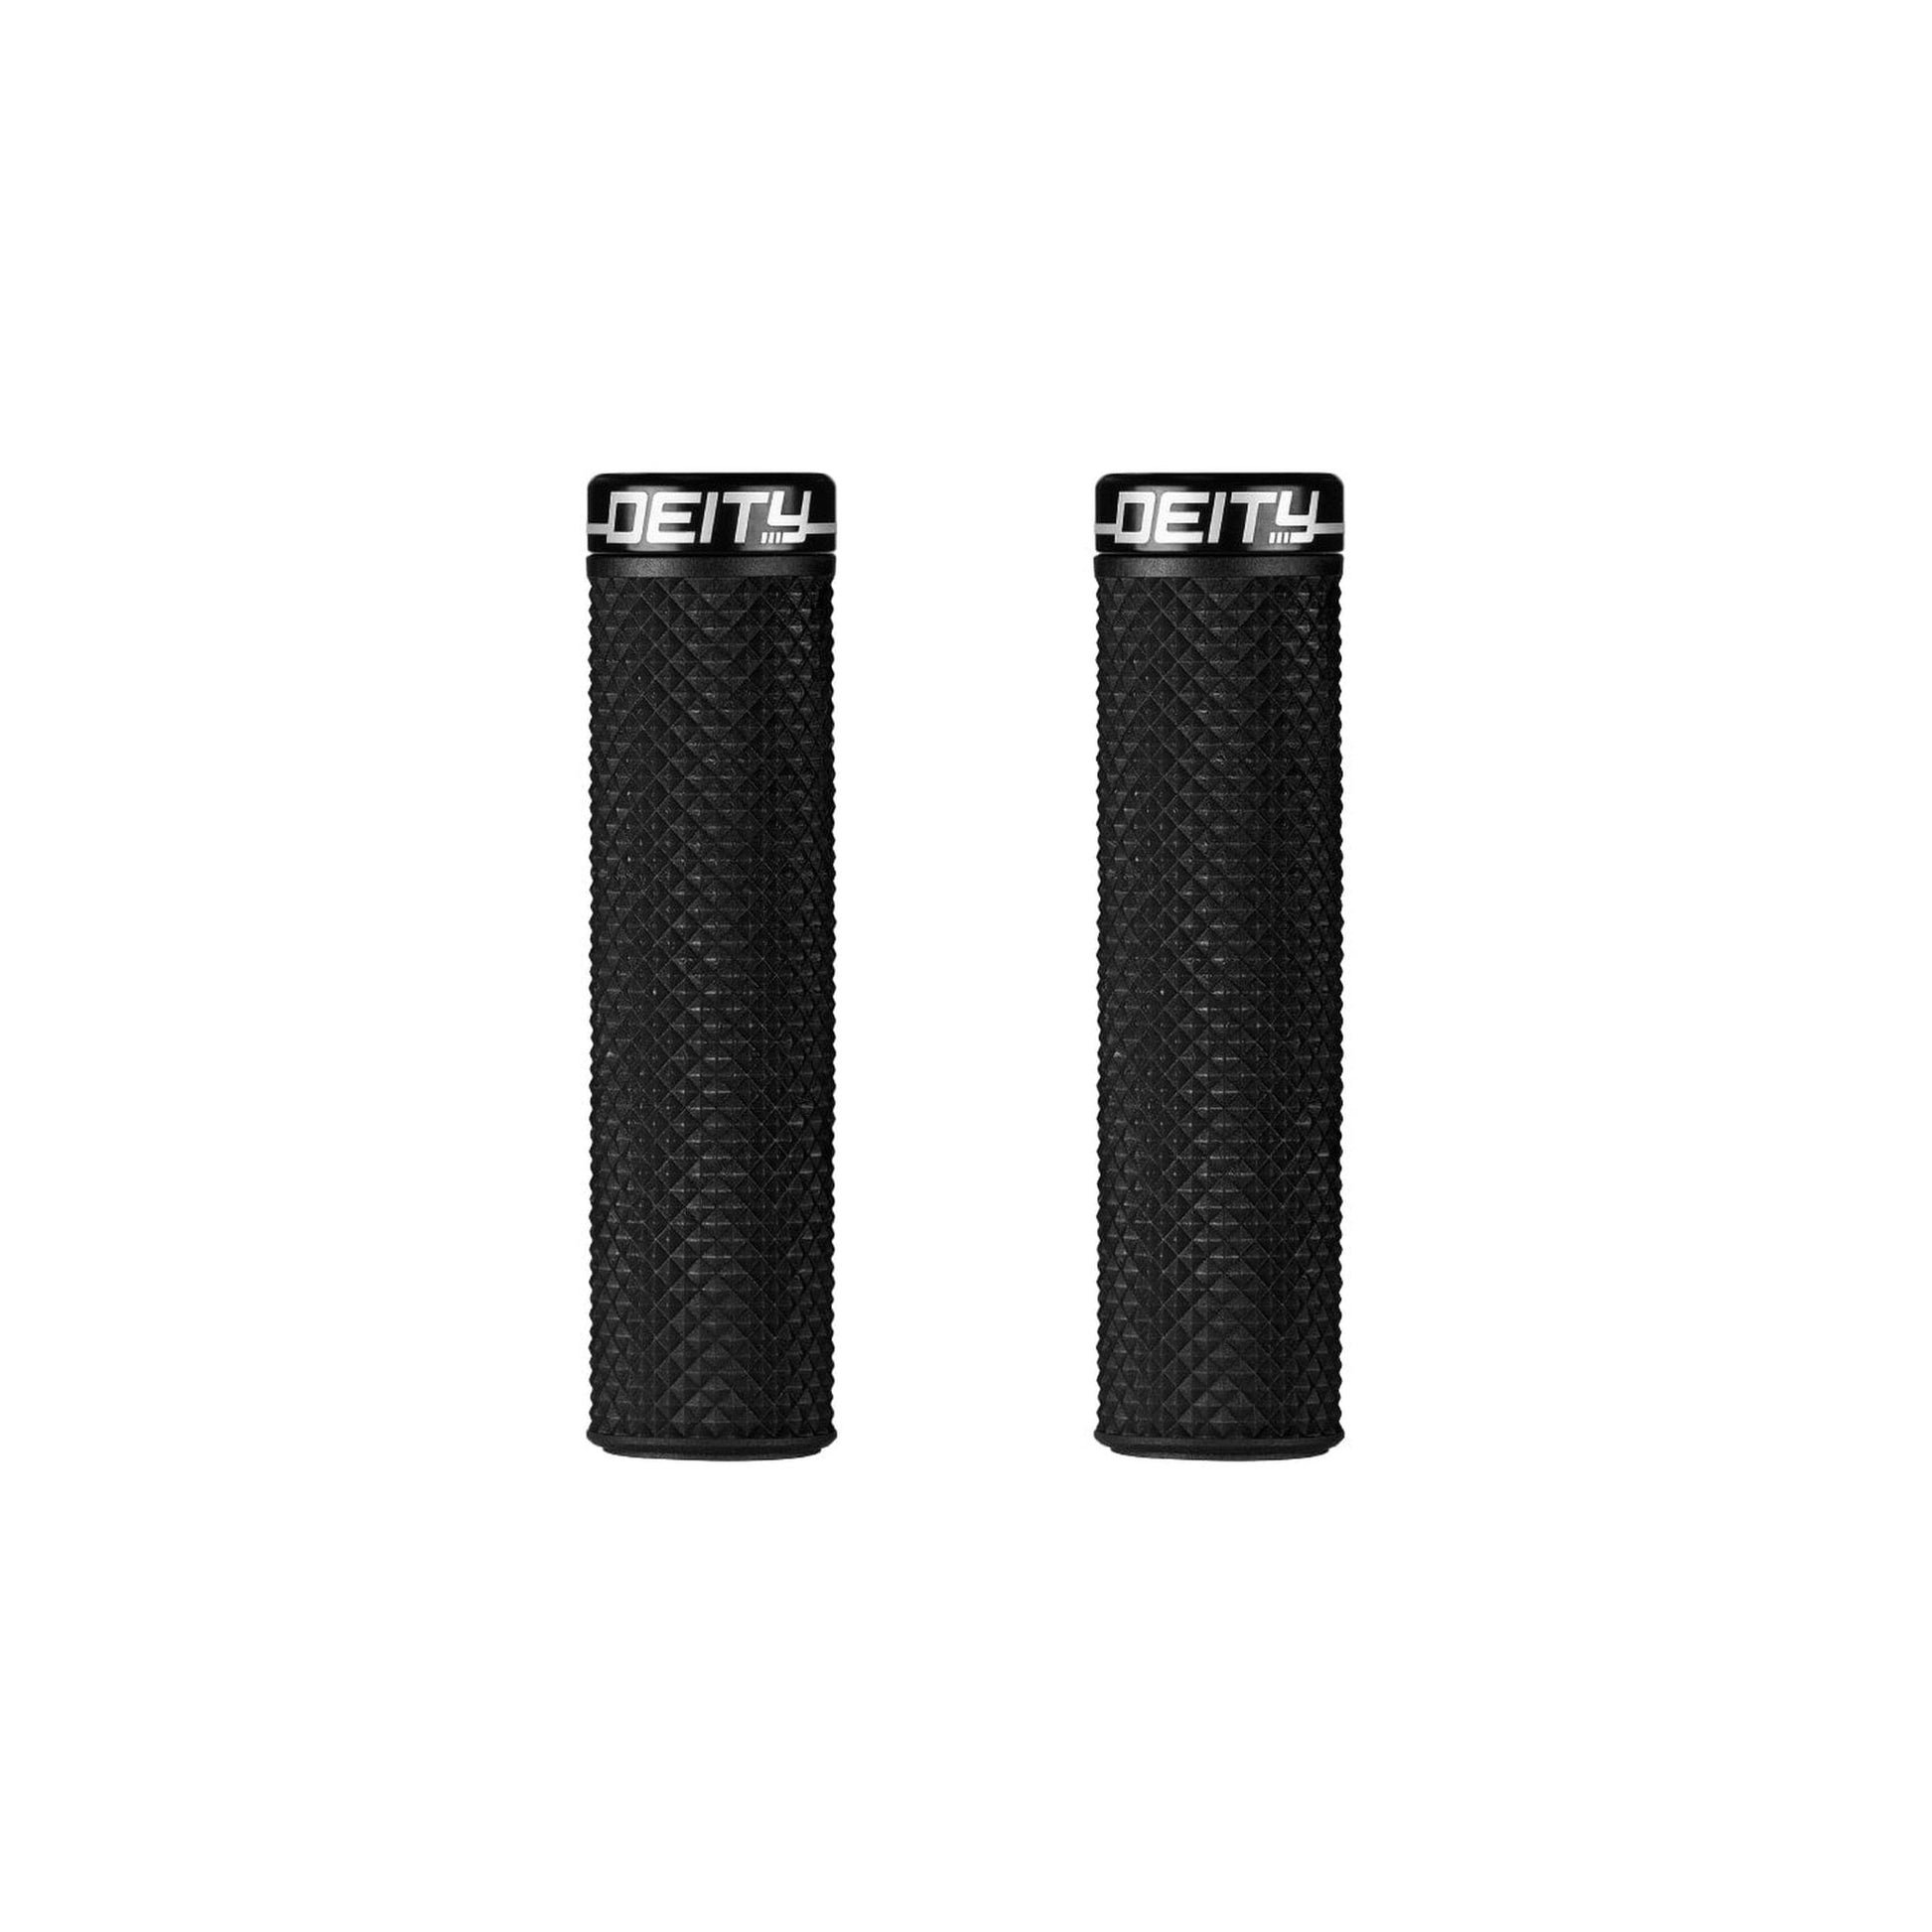 Deity Supracush Grips | completecyclist - DEITY has done it again!! We’ve gone back to the drawing board and redeveloped our TRC+ rubber compound to deliver 33% more grip and cushion without